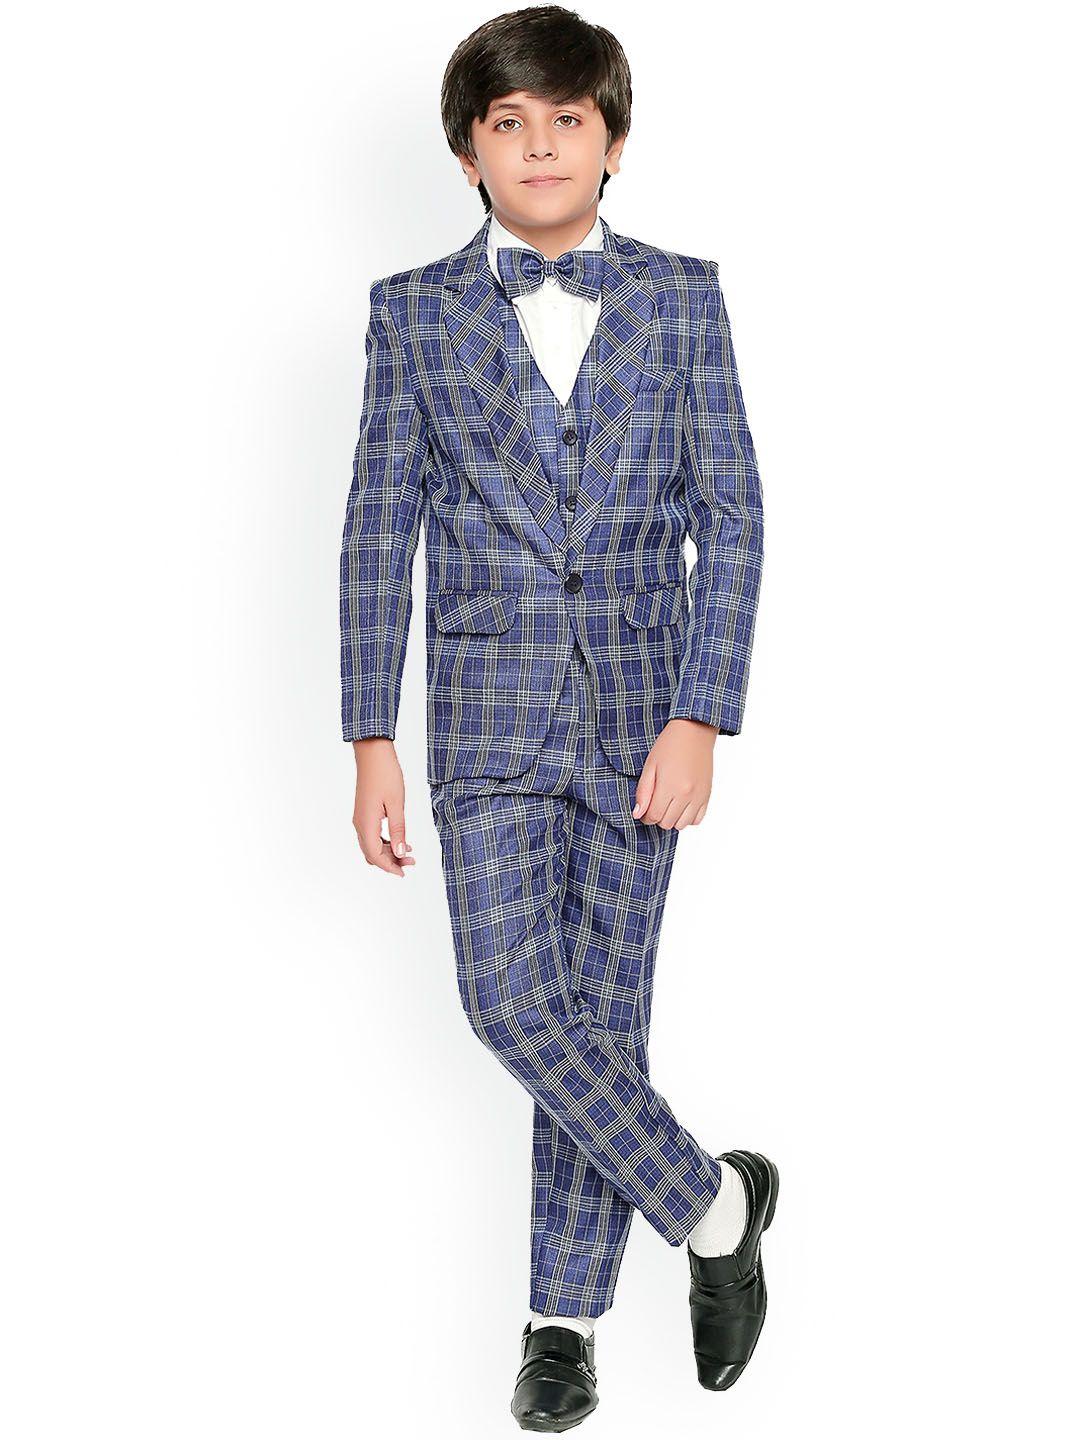 jeetethnics boys navy blue & black checked coat with trousers